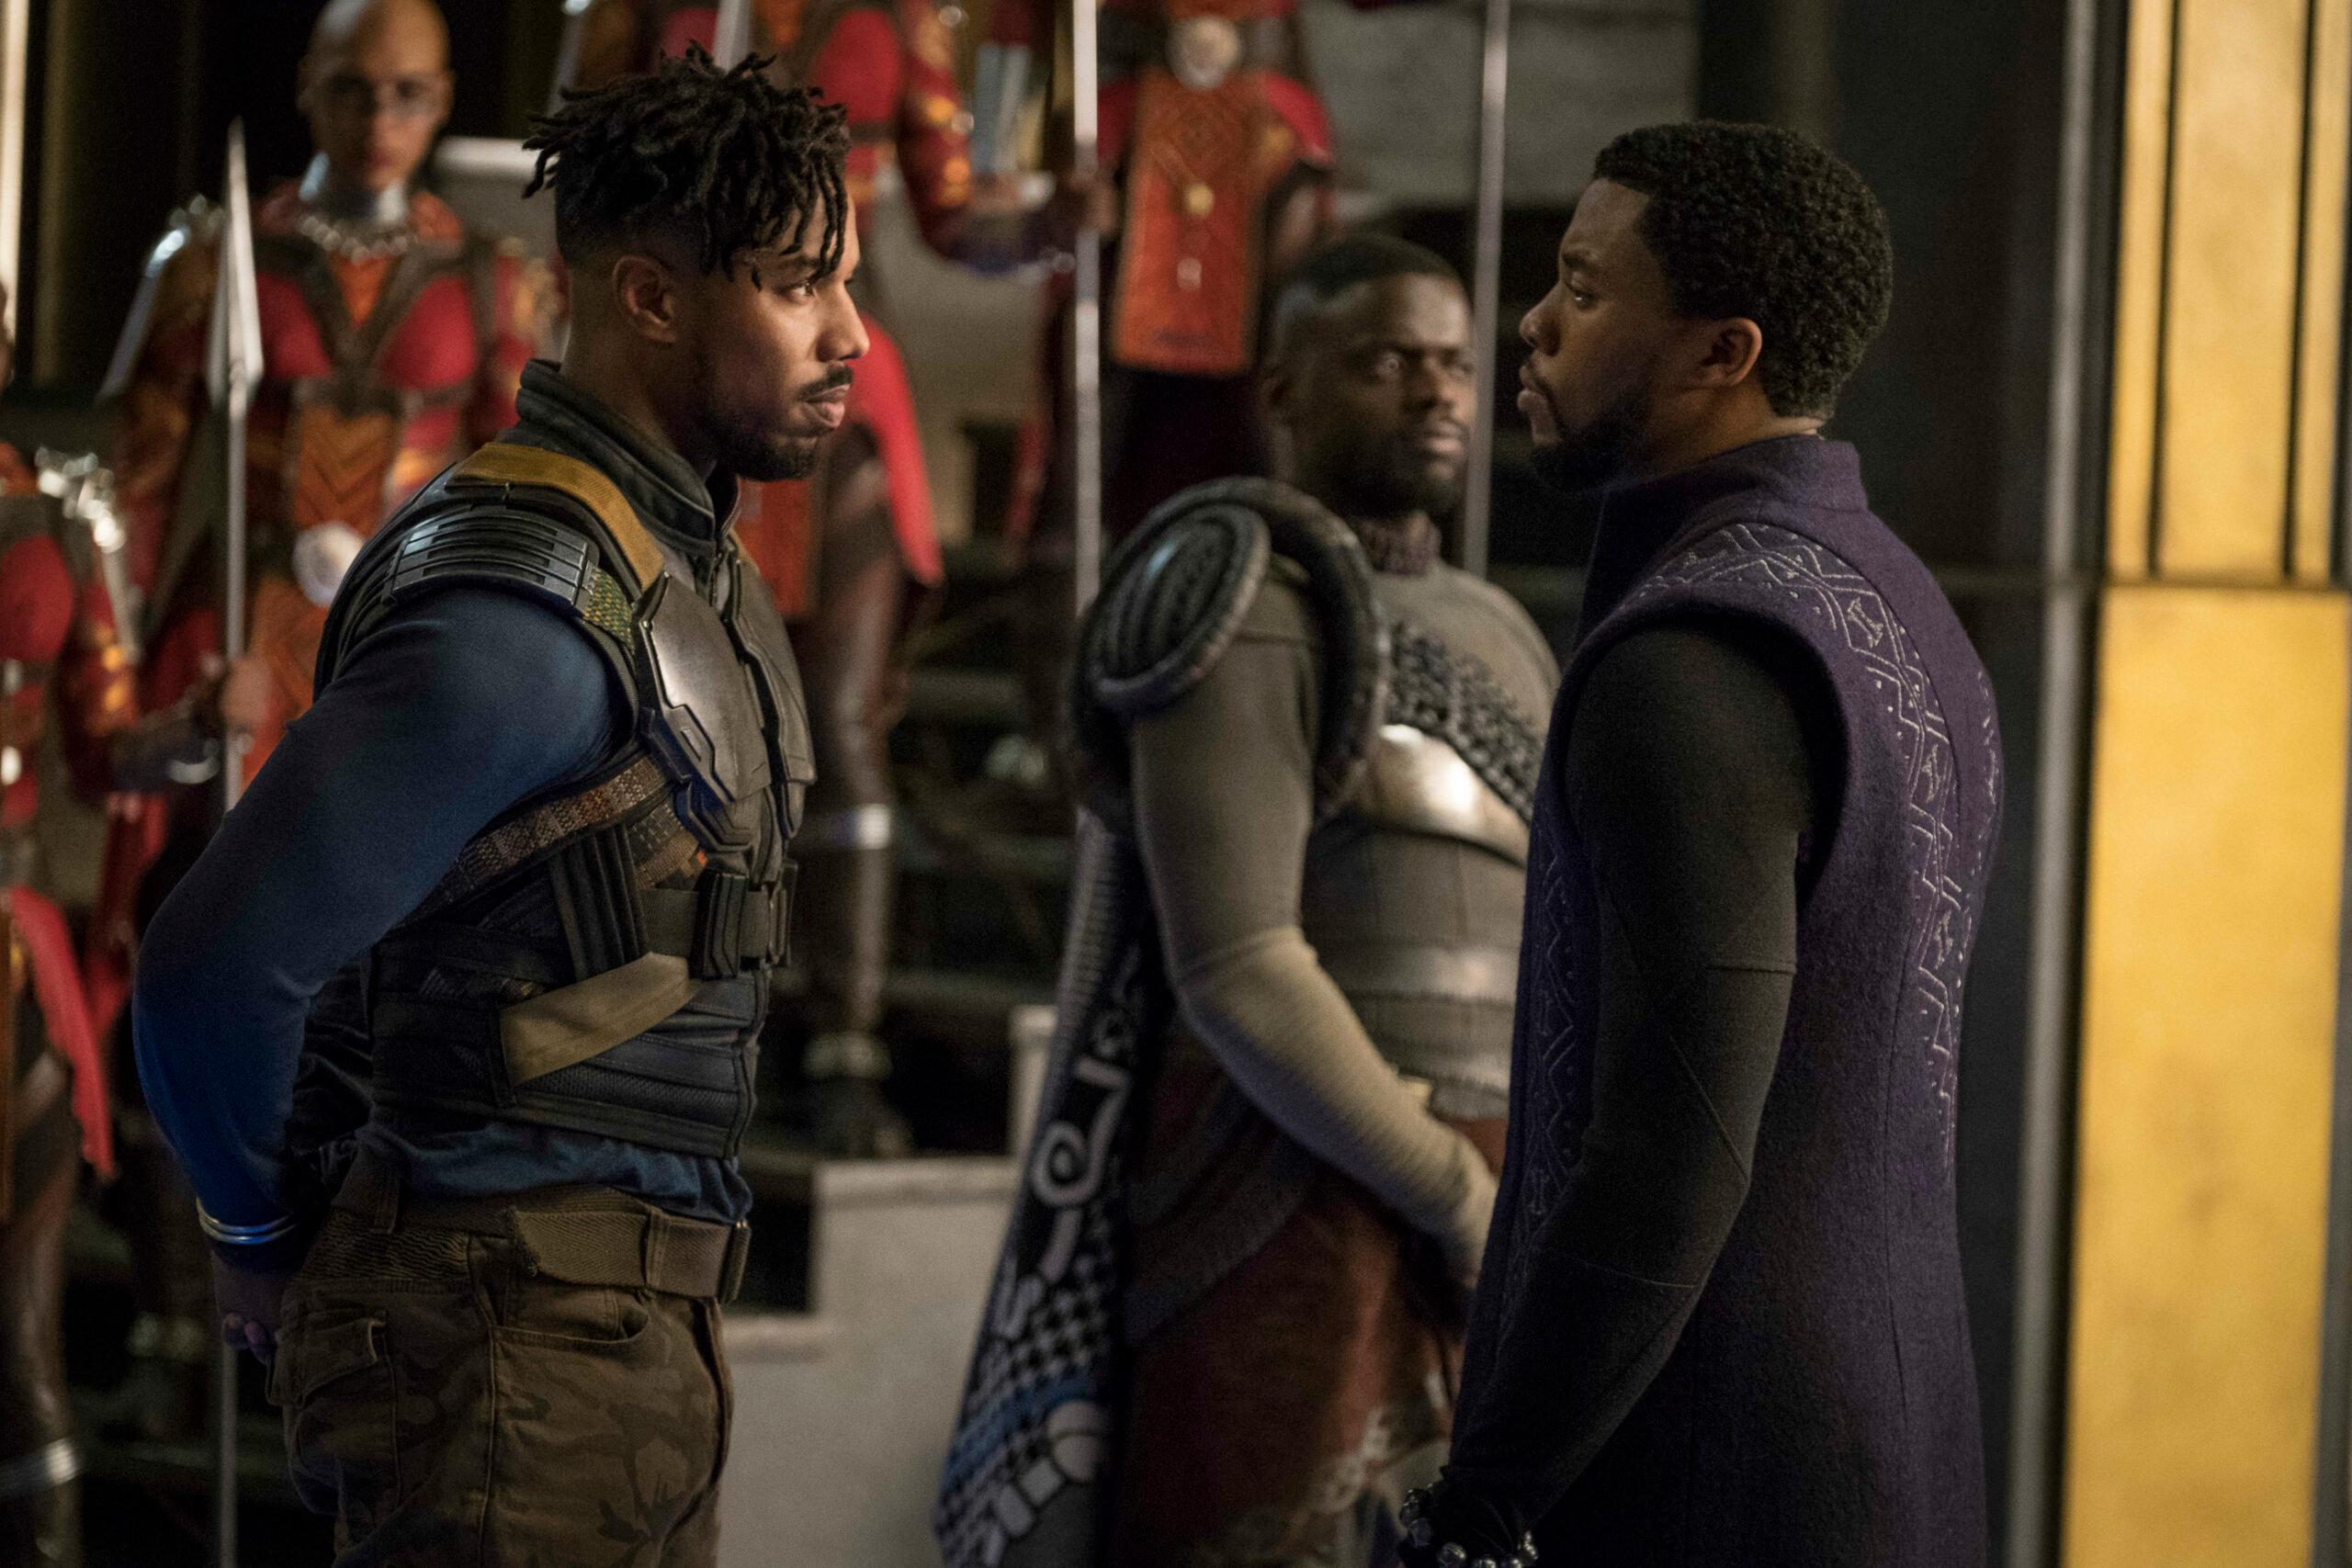 RELEASE DATE: February 16, 2018 TITLE: STUDIO: Marvel Studios DIRECTOR: Ryan Coogler PLOT: T'Challa, after the death of his father, the King of Wakanda, returns home to the isolated, technologically advanced African nation to succeed to the throne and take his rightful place as king. STARRING: null. 15 Feb 2018 Pictured: RELEASE DATE: February 16, 2018 TITLE: STUDIO: Marvel Studios DIRECTOR: Ryan Coogler PLOT: T'Challa, after the death of his father, the King of Wakanda, returns home to the isolated, technologically advanced African nation to succeed to the throne and take his rightful place as king. STARRING: Marvel Studios' BLACK PANTHER..L to R: Erik Killmonger (Michael B. Jordan) and T'Challa/Black Panther (Chadwick Boseman), b/g W'Kabi (Daniel Kaluuya)..